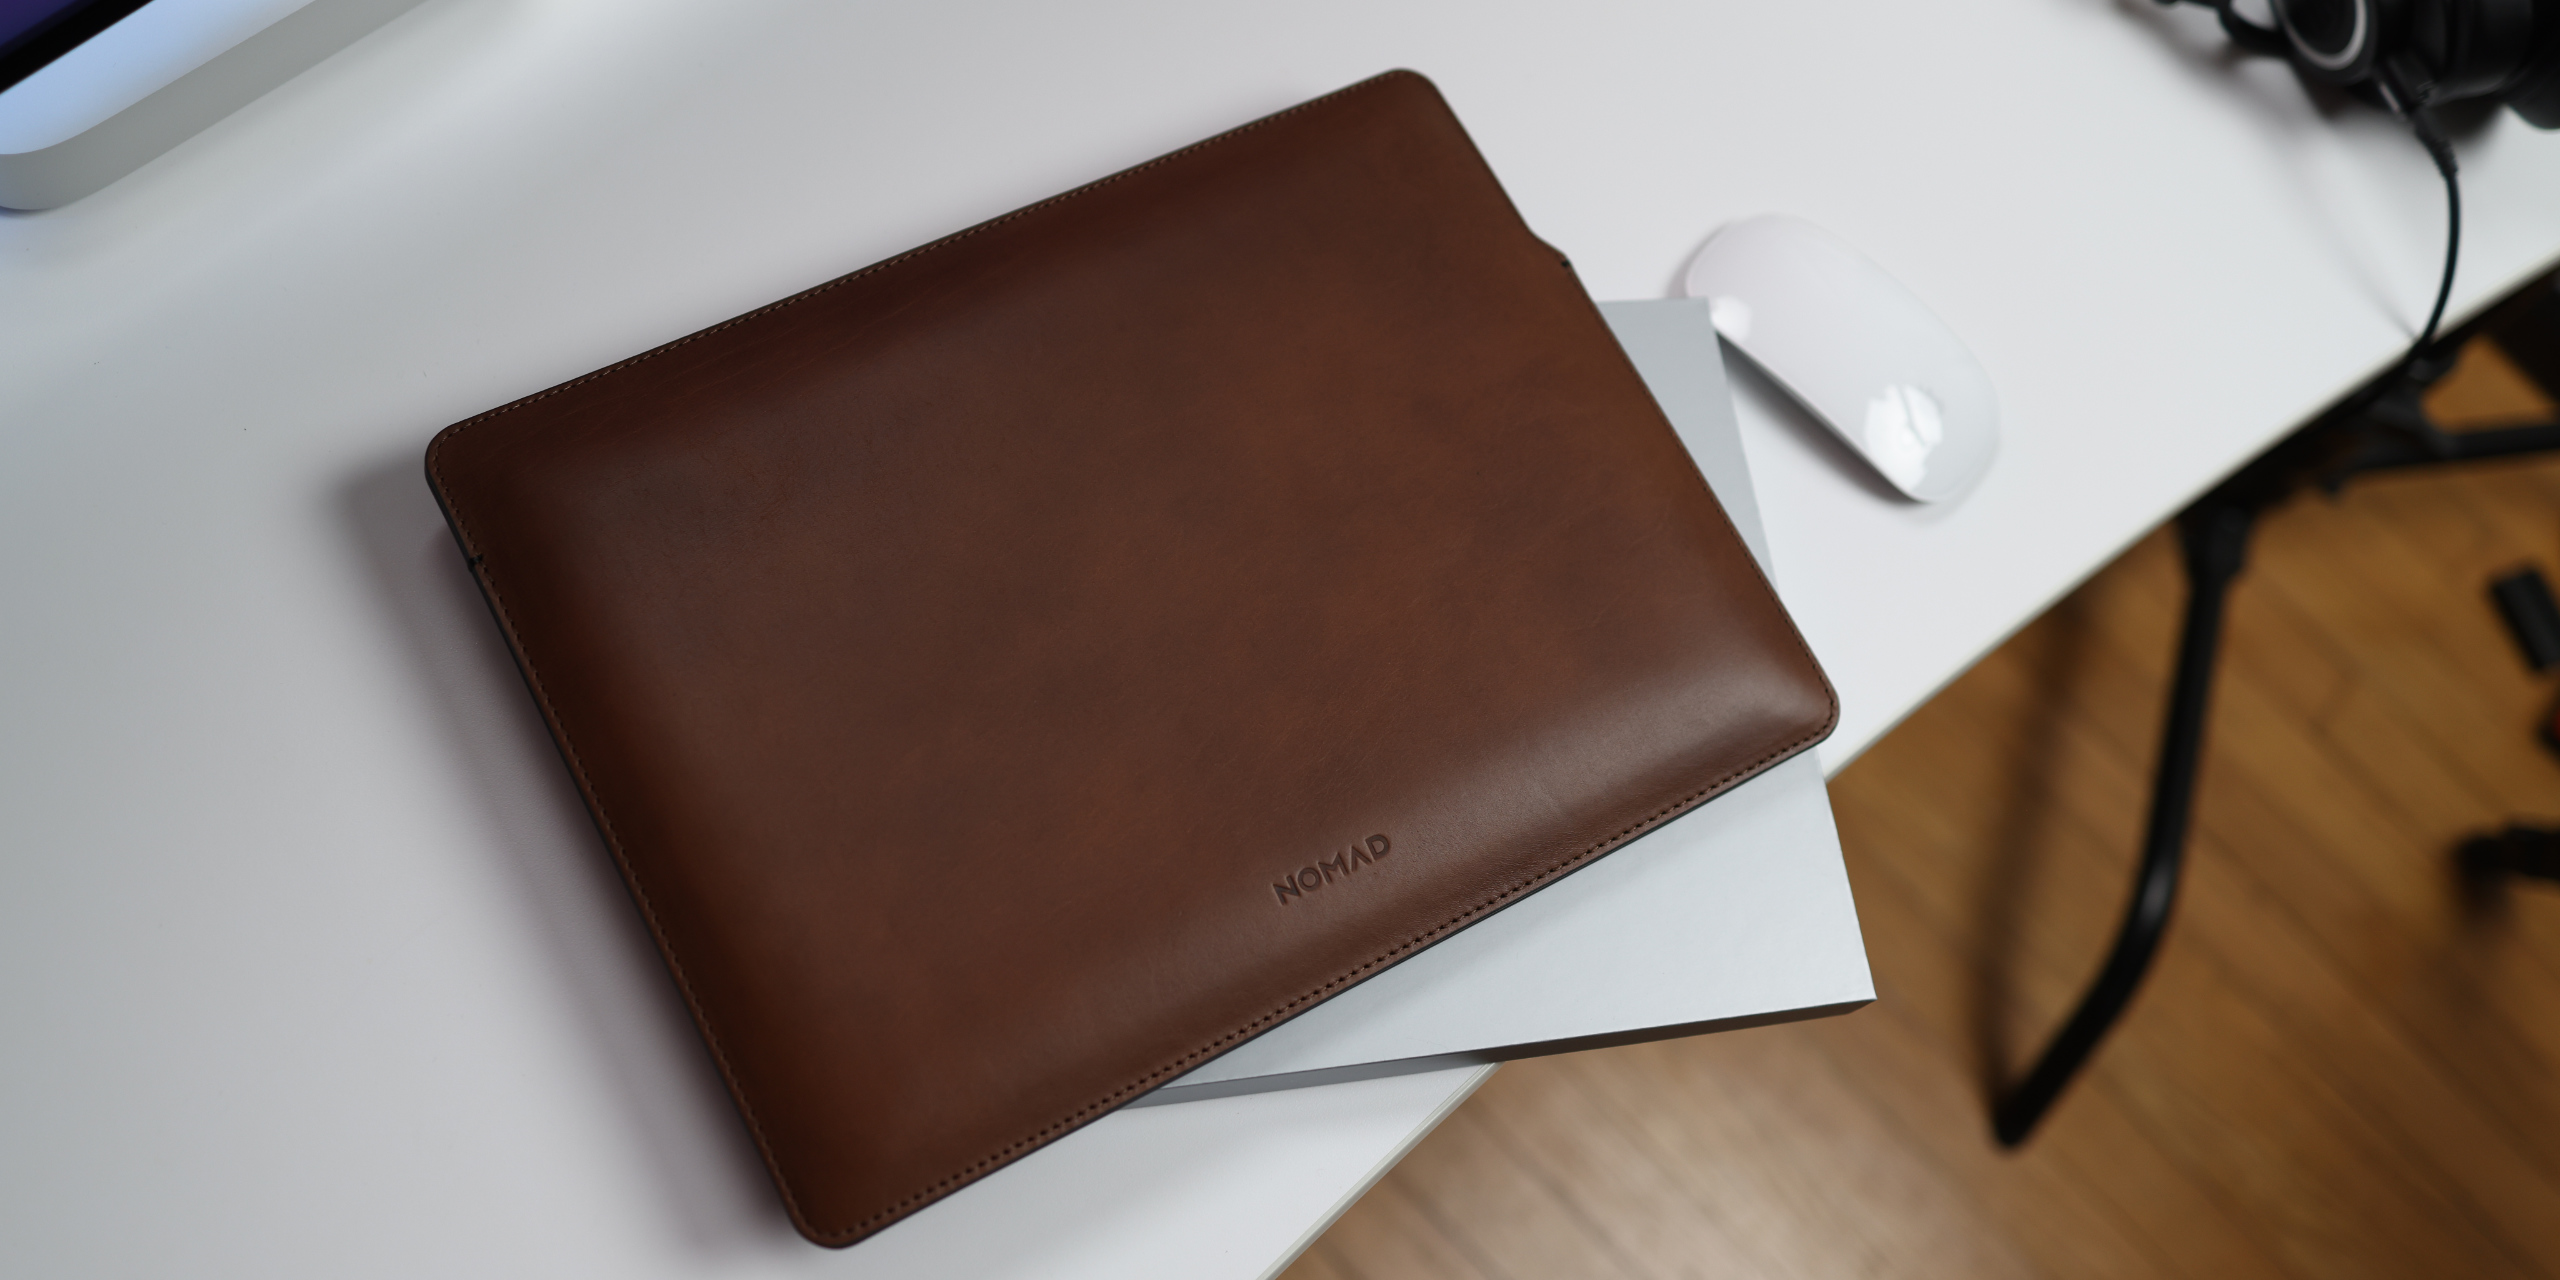 Hands-on with the Nomad leather sleeve for MacBooks - 9to5Mac